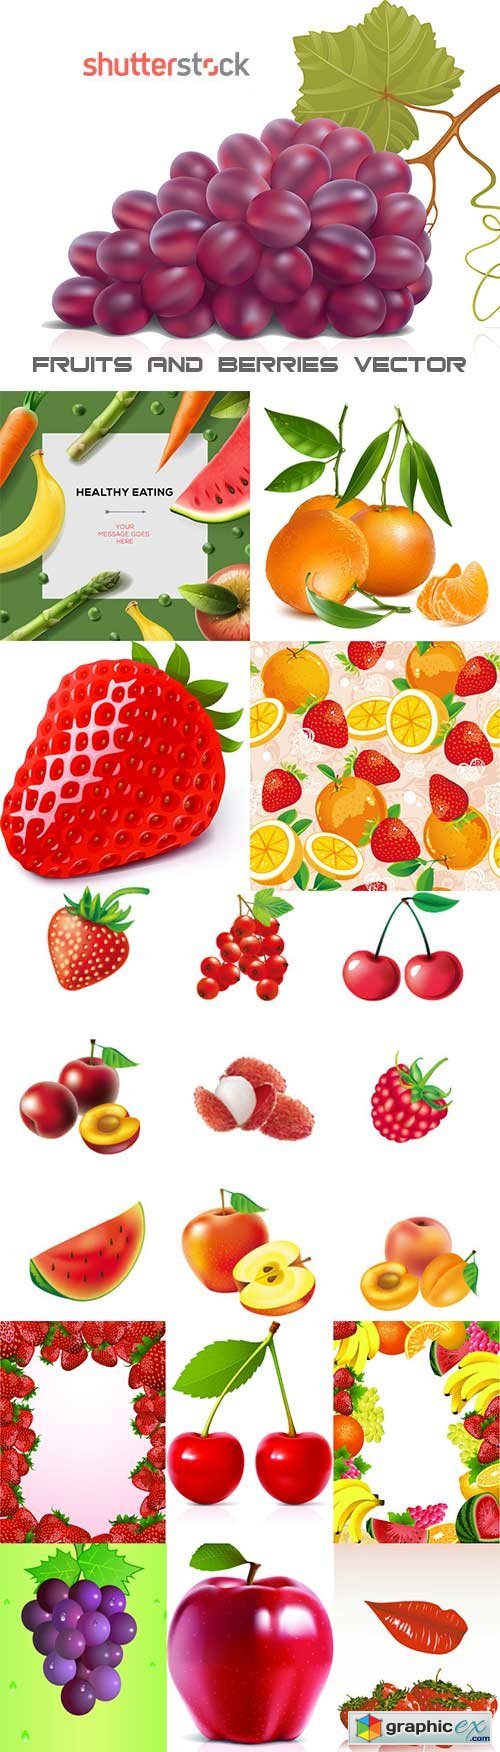 Fruits and berries vector